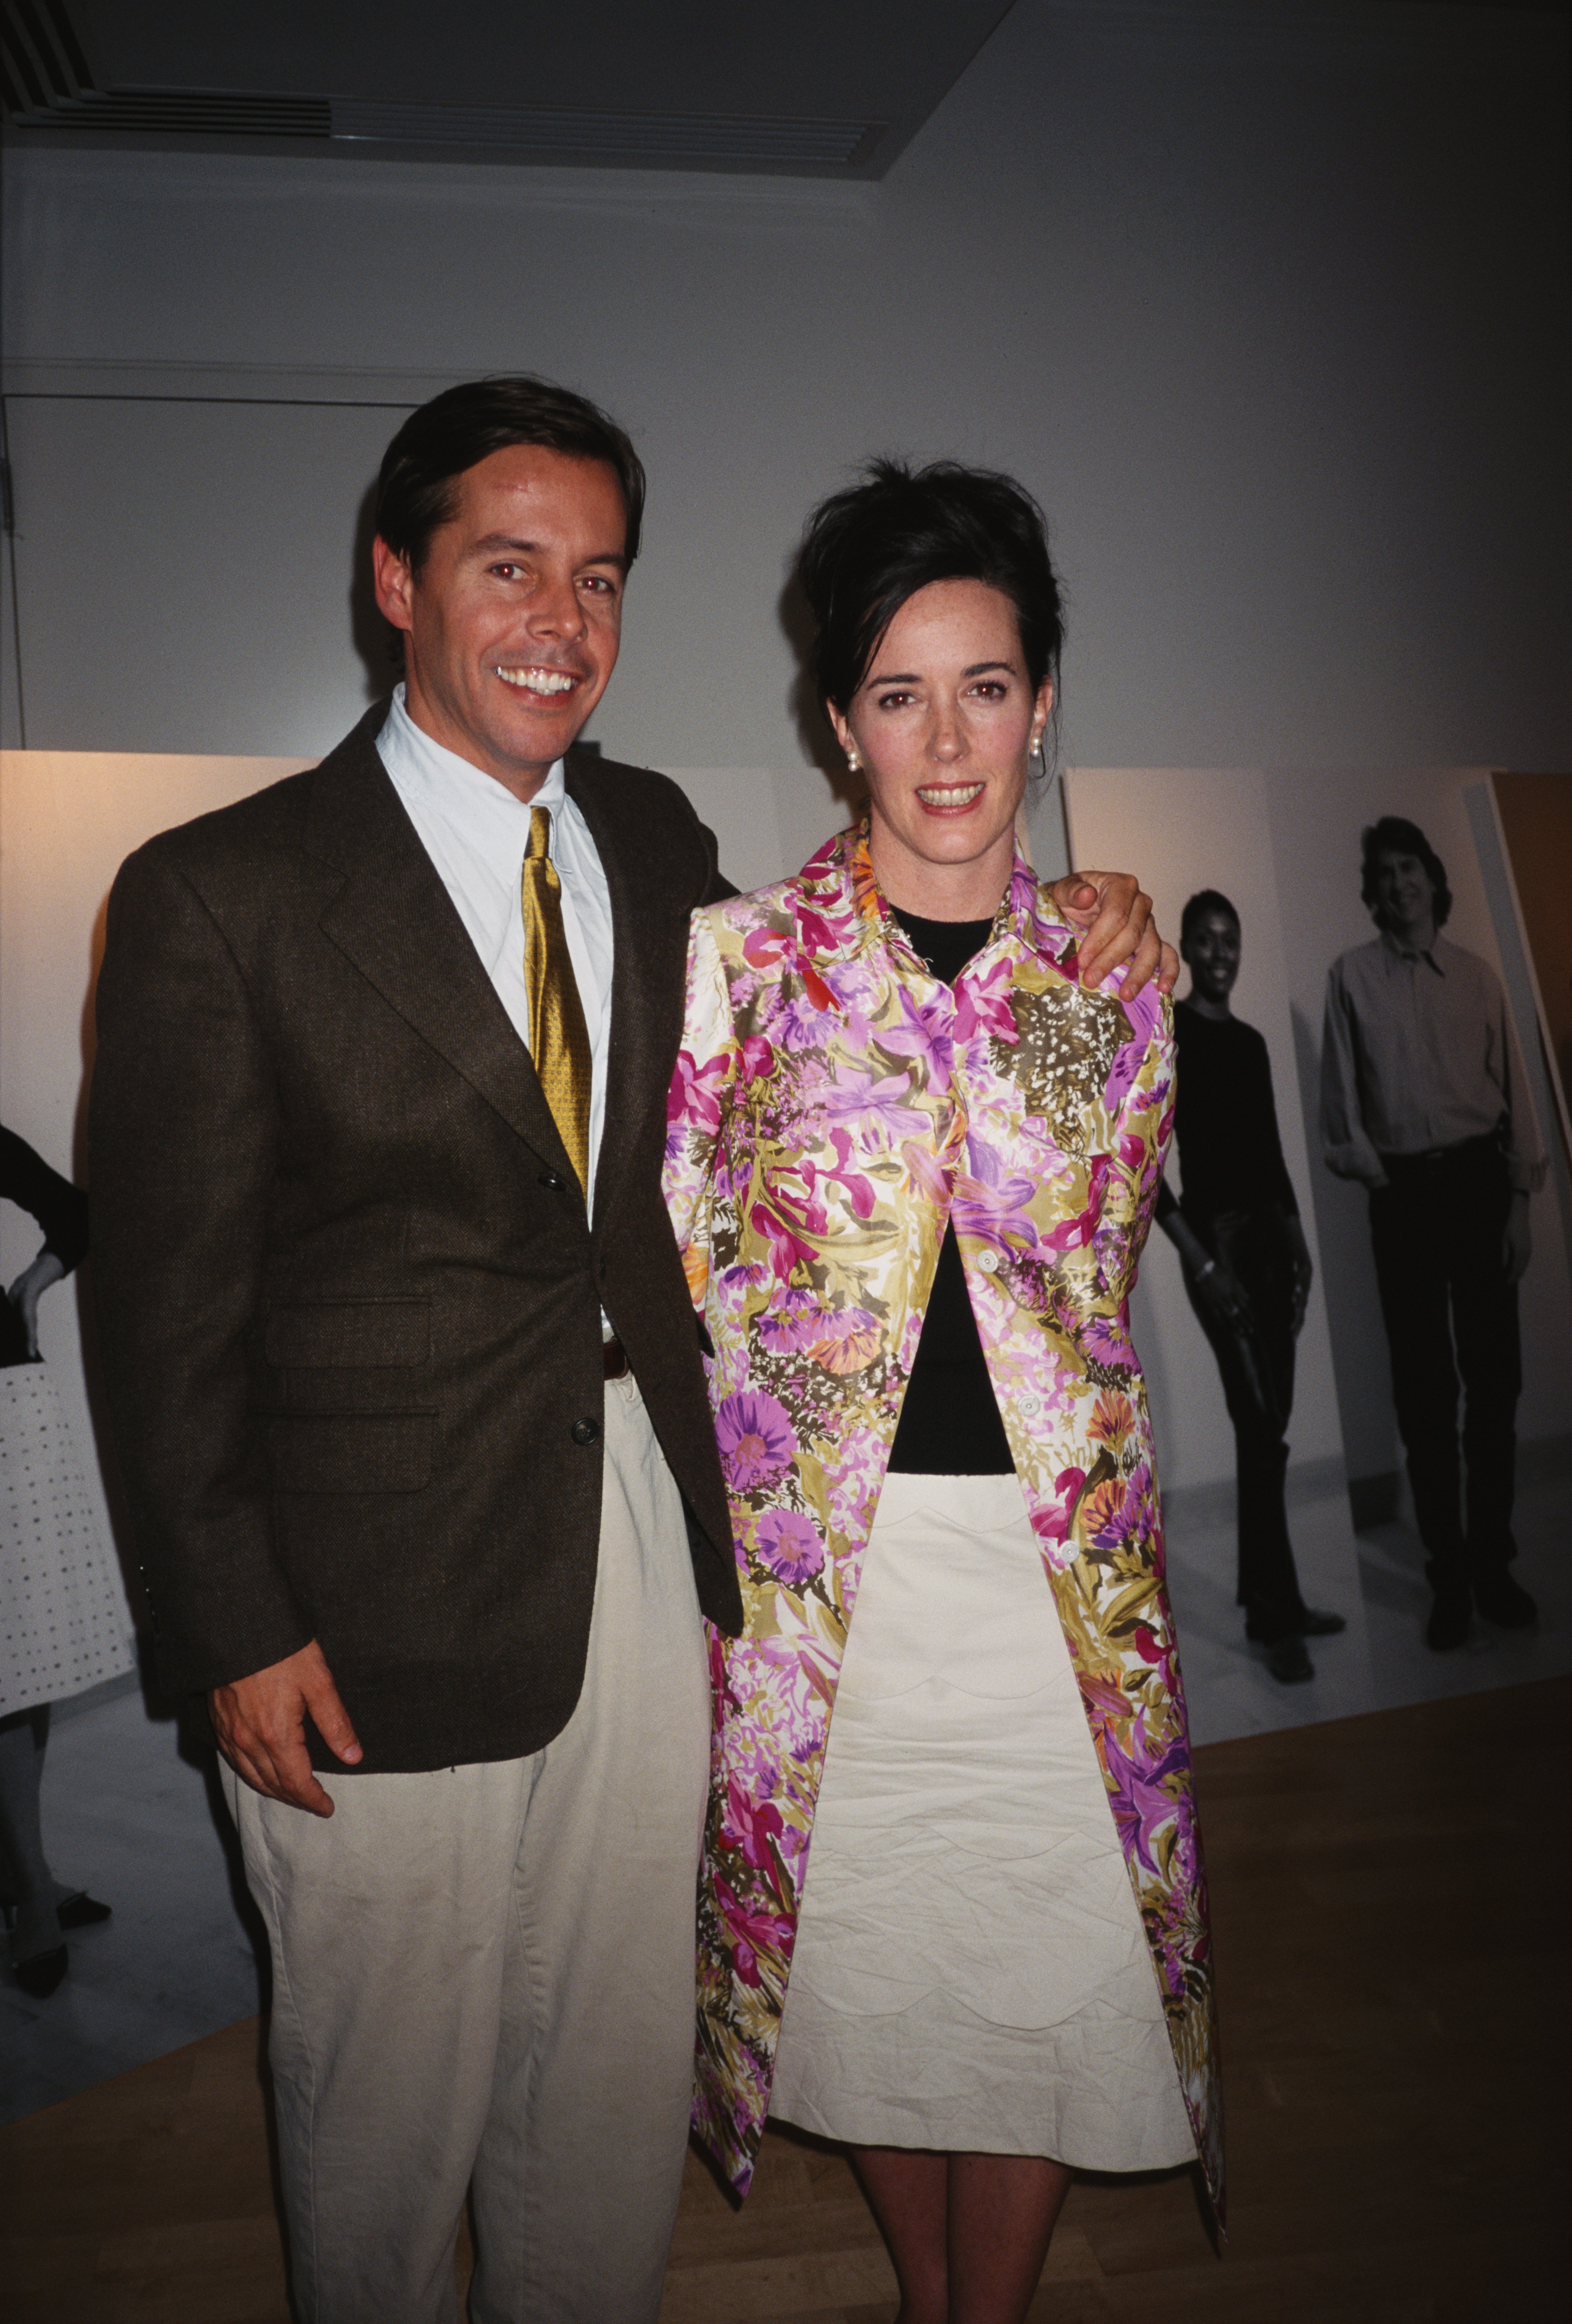 Kate Spade Fell for Husband in University - She Referred to Him in Her  Death Note to Her Daughter